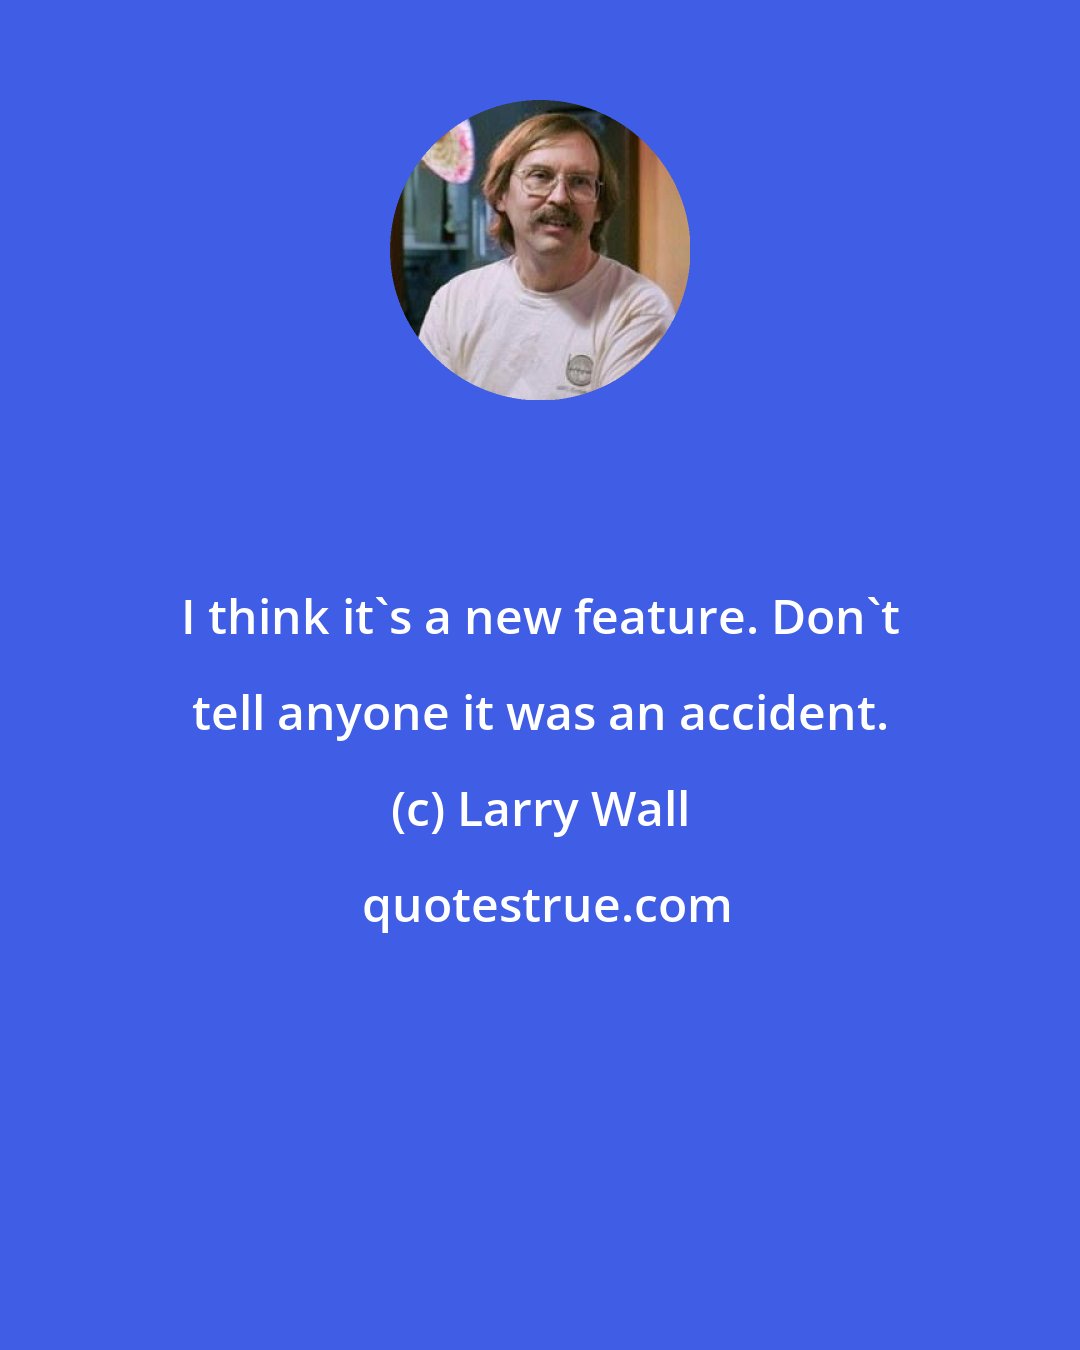 Larry Wall: I think it's a new feature. Don't tell anyone it was an accident.